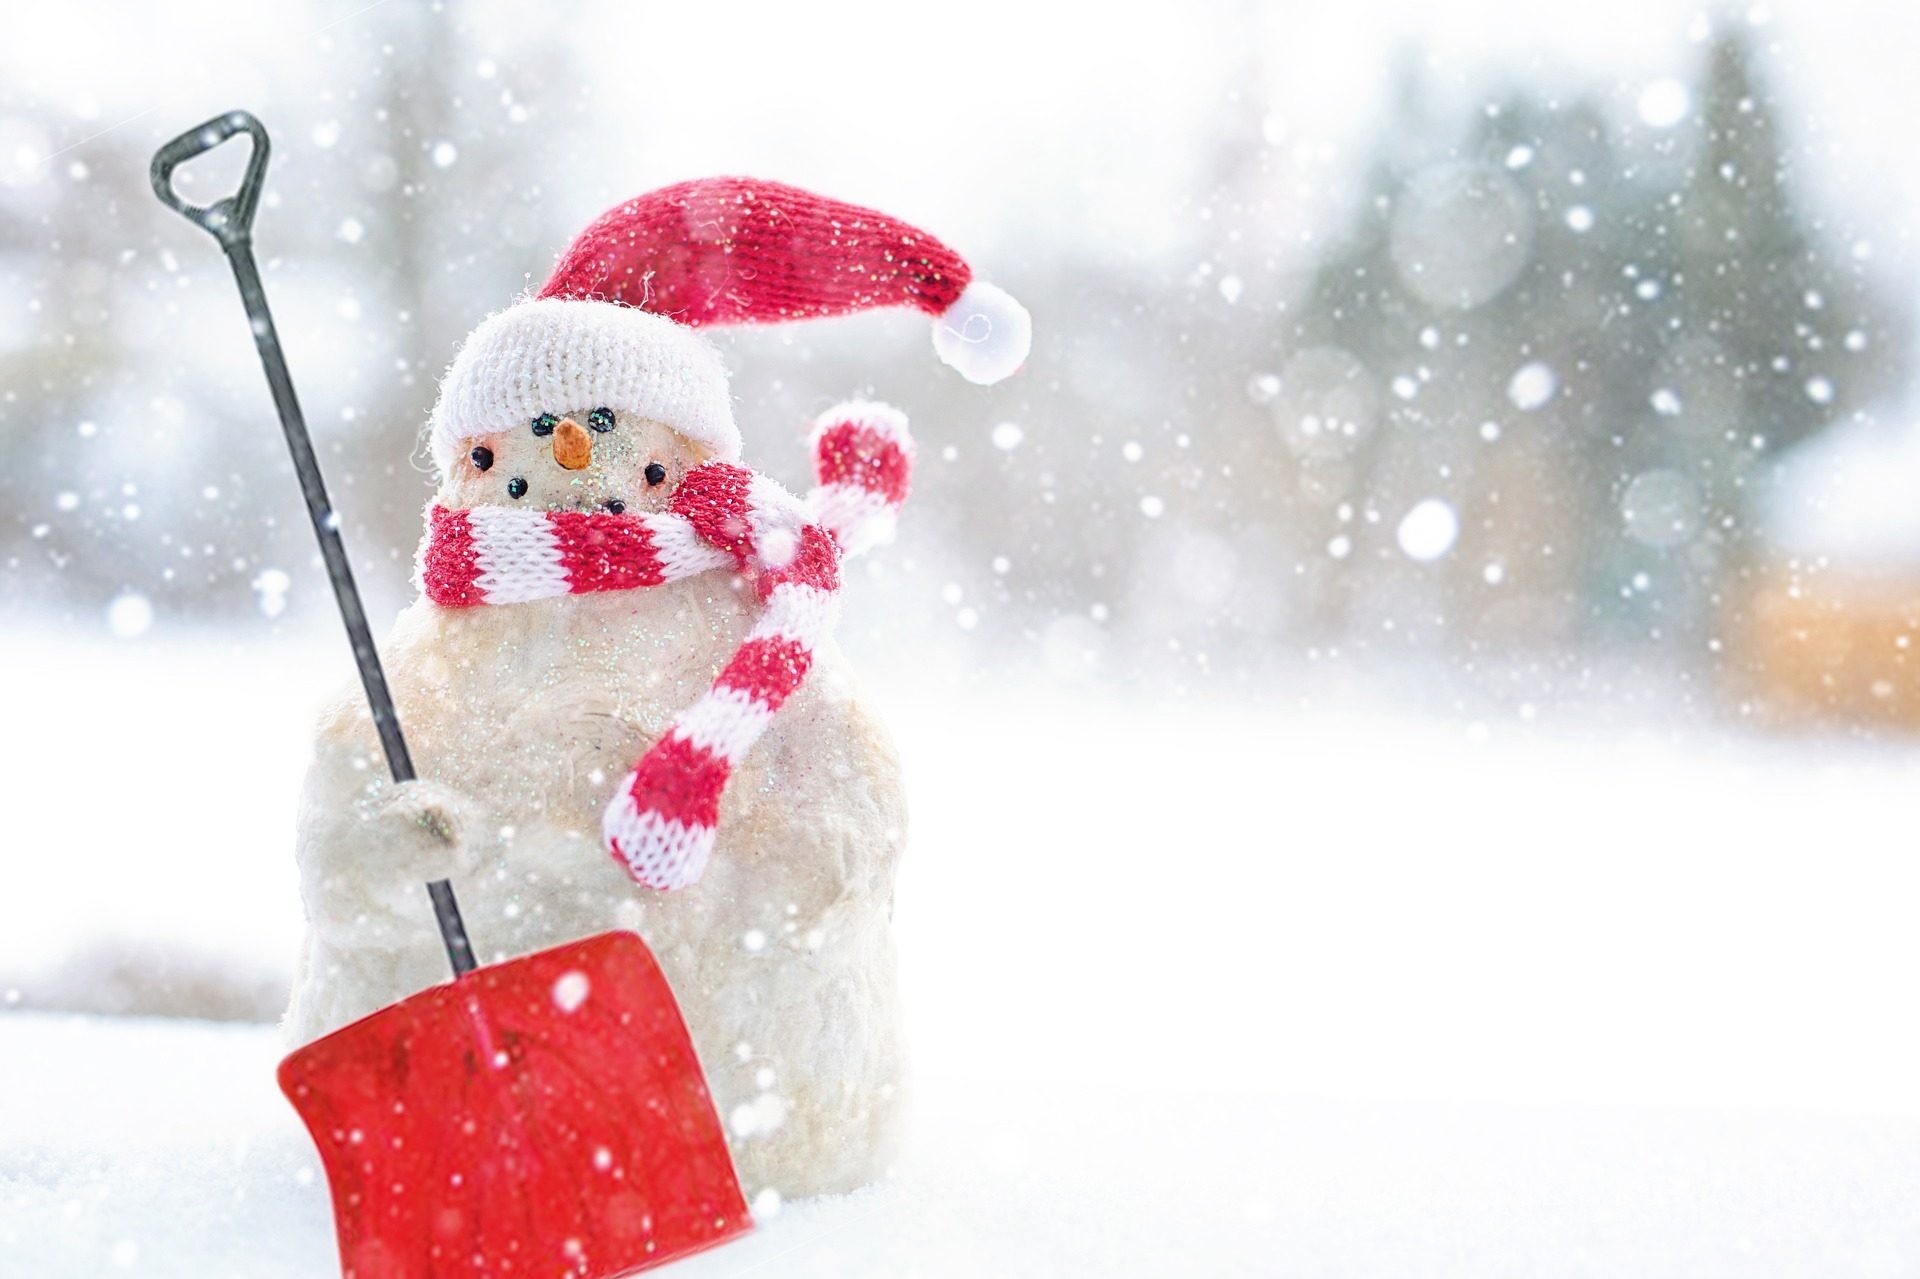 1920x1279 Free Christmas snowman wallpaper in winter 1920p free download